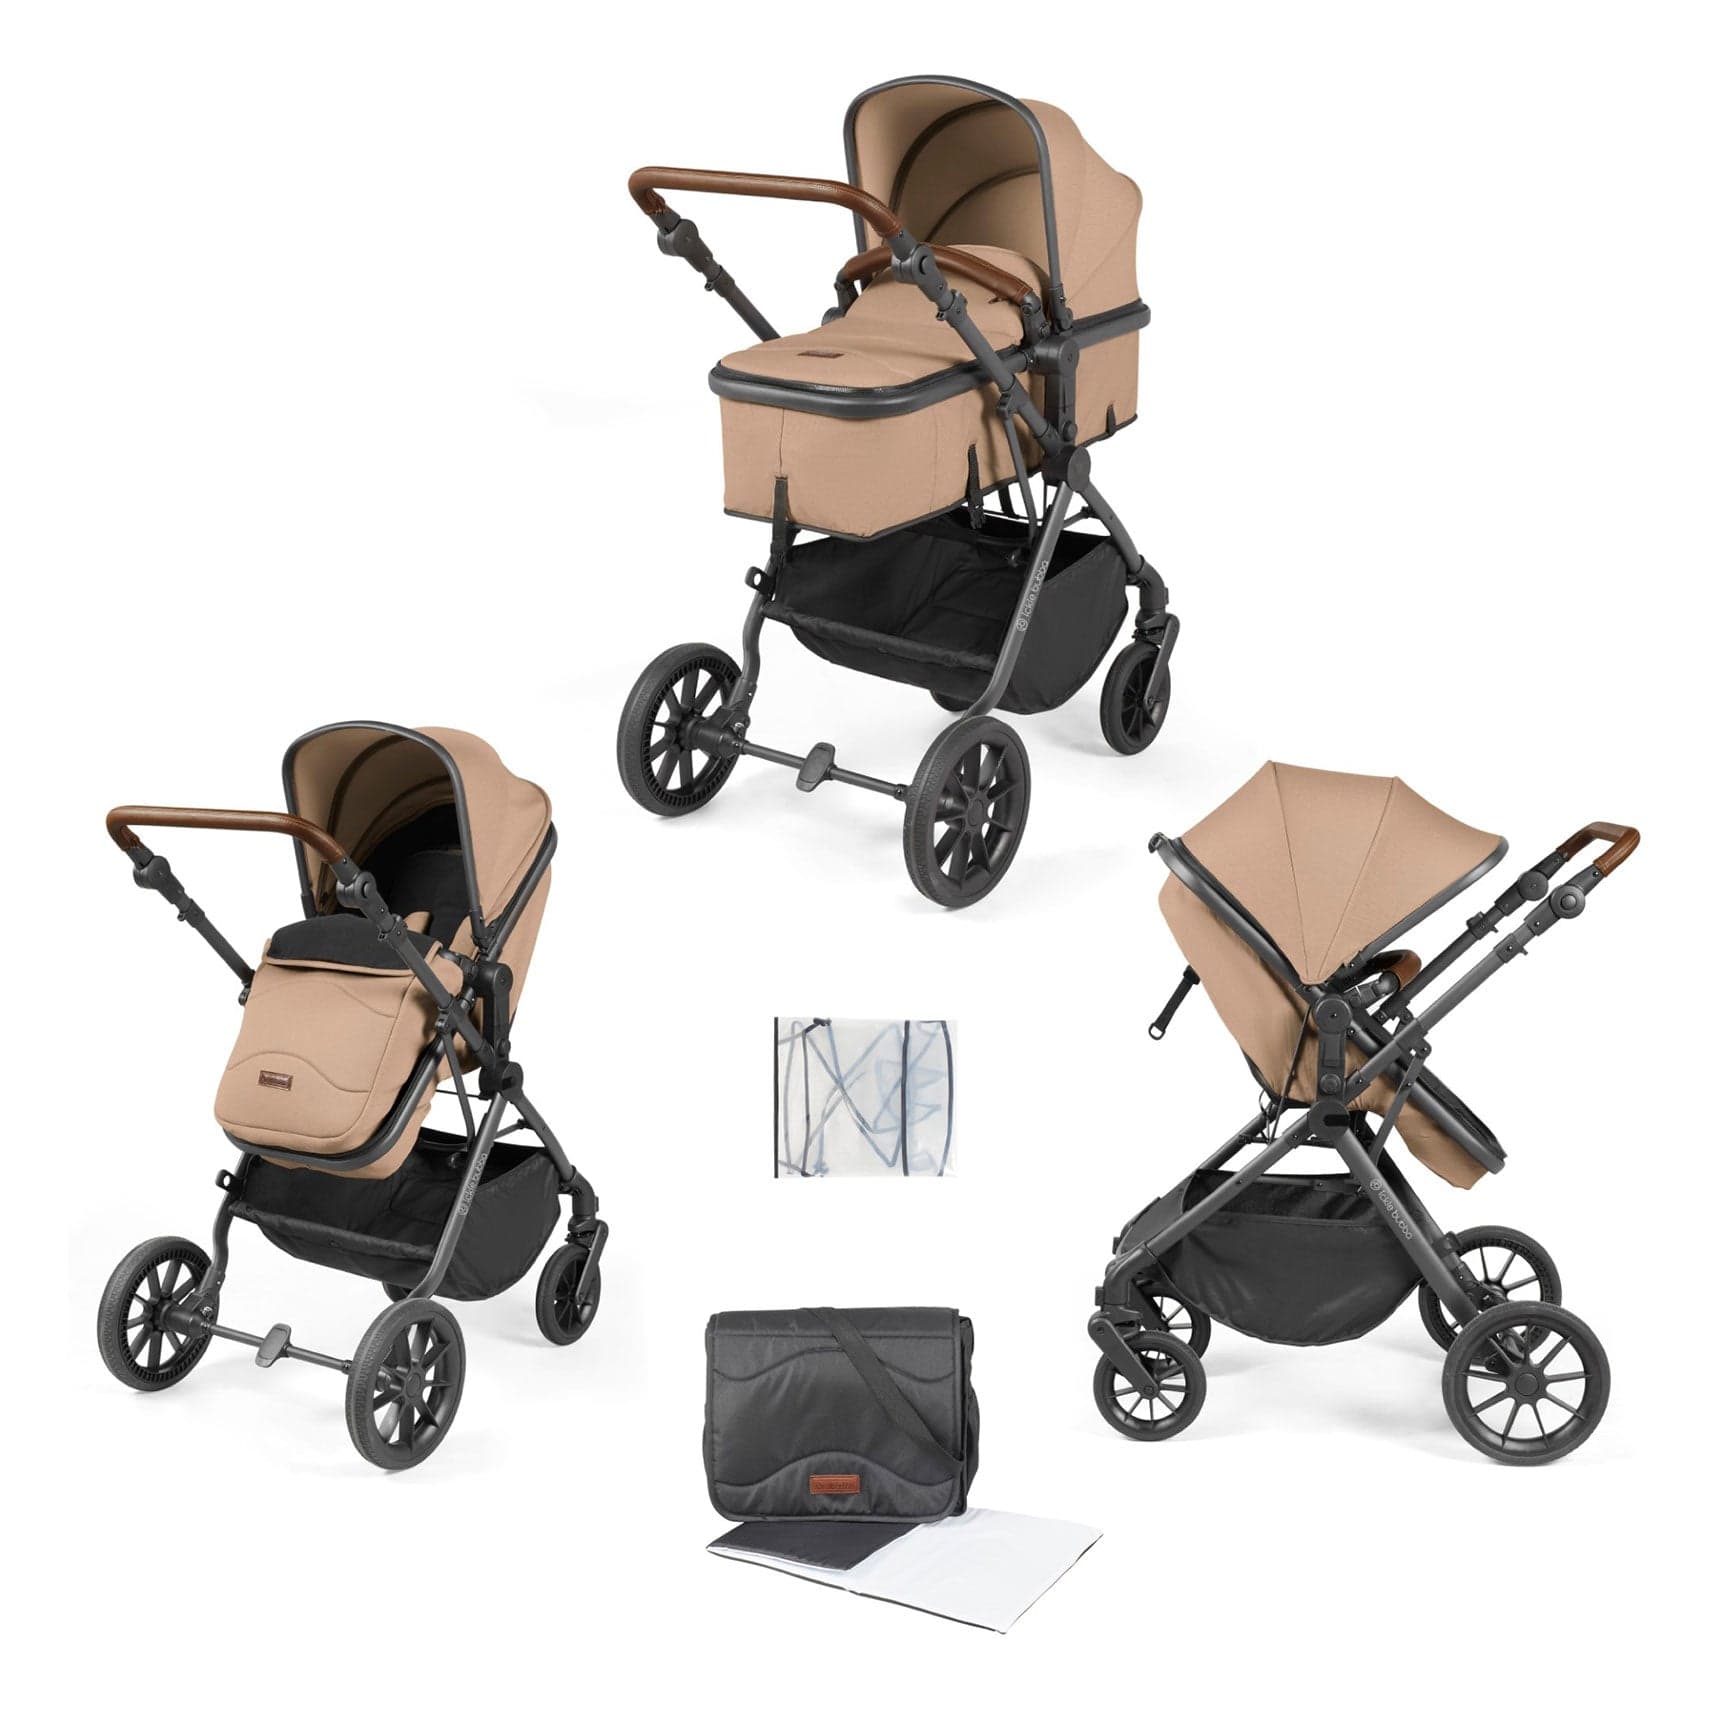 Ickle Bubba travel systems Ickle Bubba Cosmo 2 in 1 Plus Carrycot & Pushchair - Gun metal/Desert 10-007-001-136